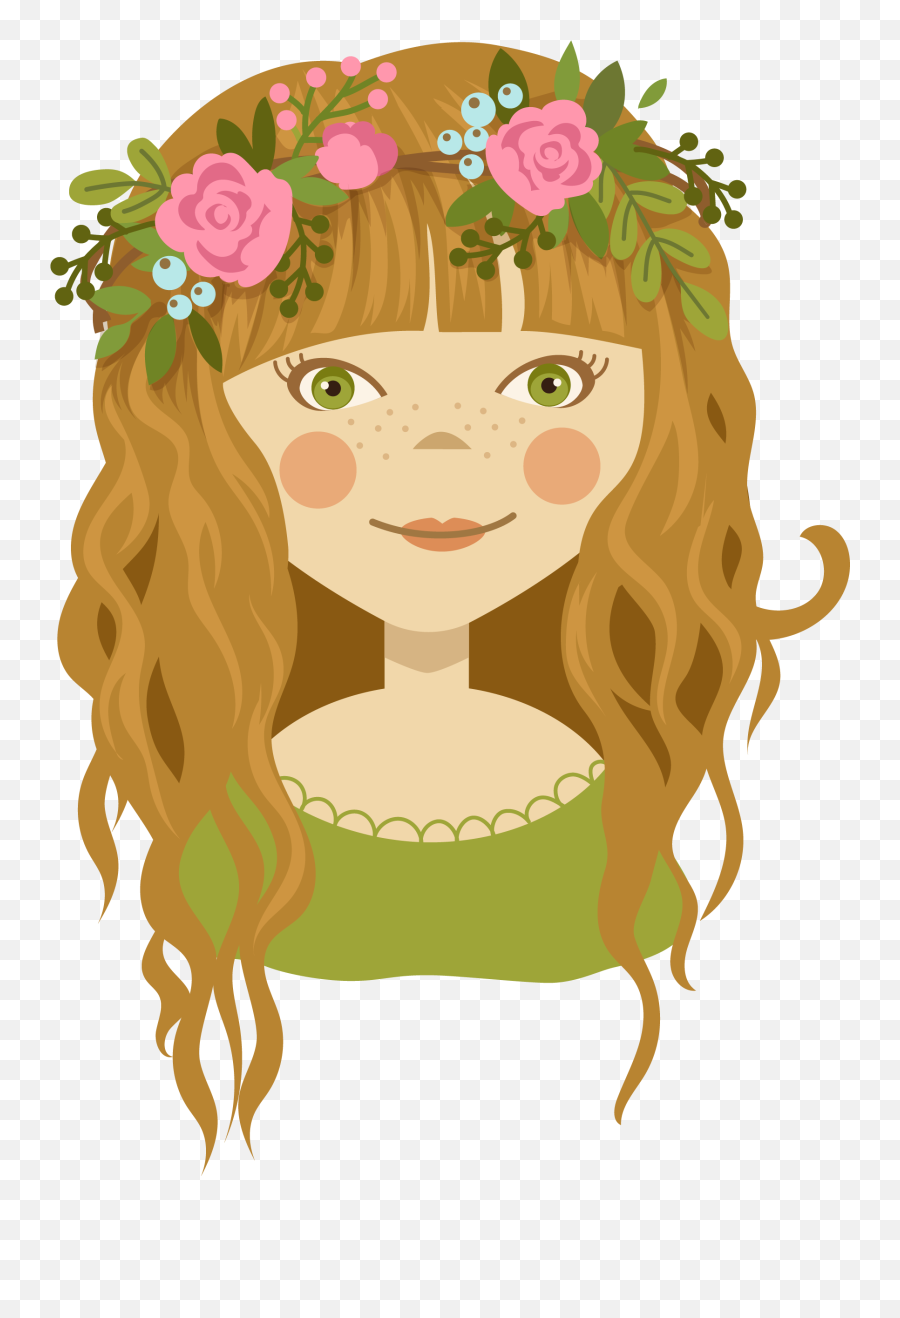 Wreath Flower Crown Illustration - Girl With Flower Crown Wreath Flower Crown Illustration Emoji,Flower Wreath Clipart